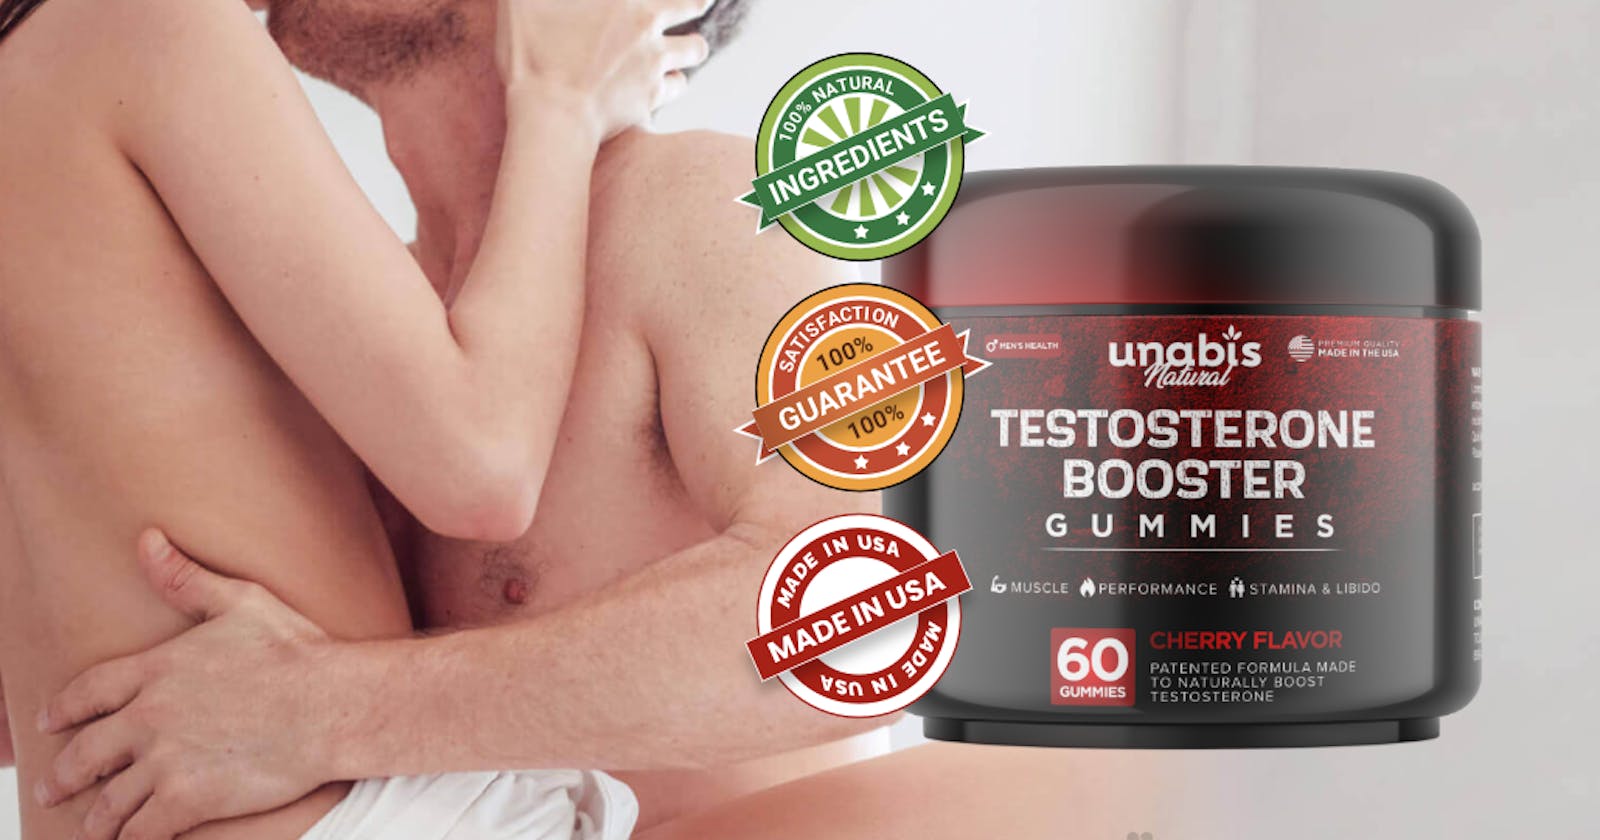 Unabis Testosterone Booster Gummies Review, Price, Amazon, Side Effects & where To Buy?